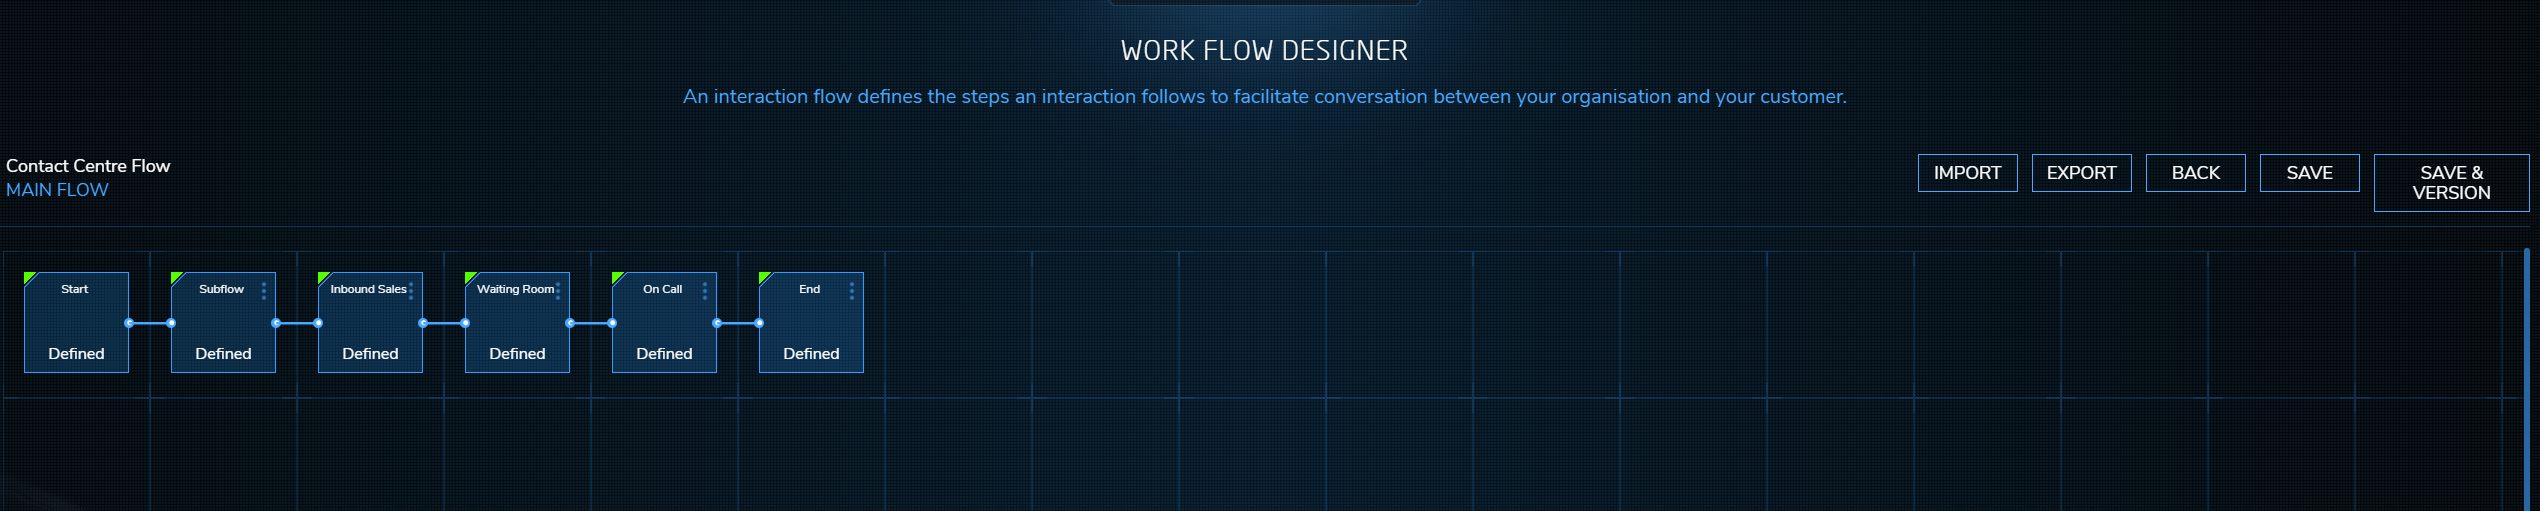 Main_Flow_with_Subflow.png